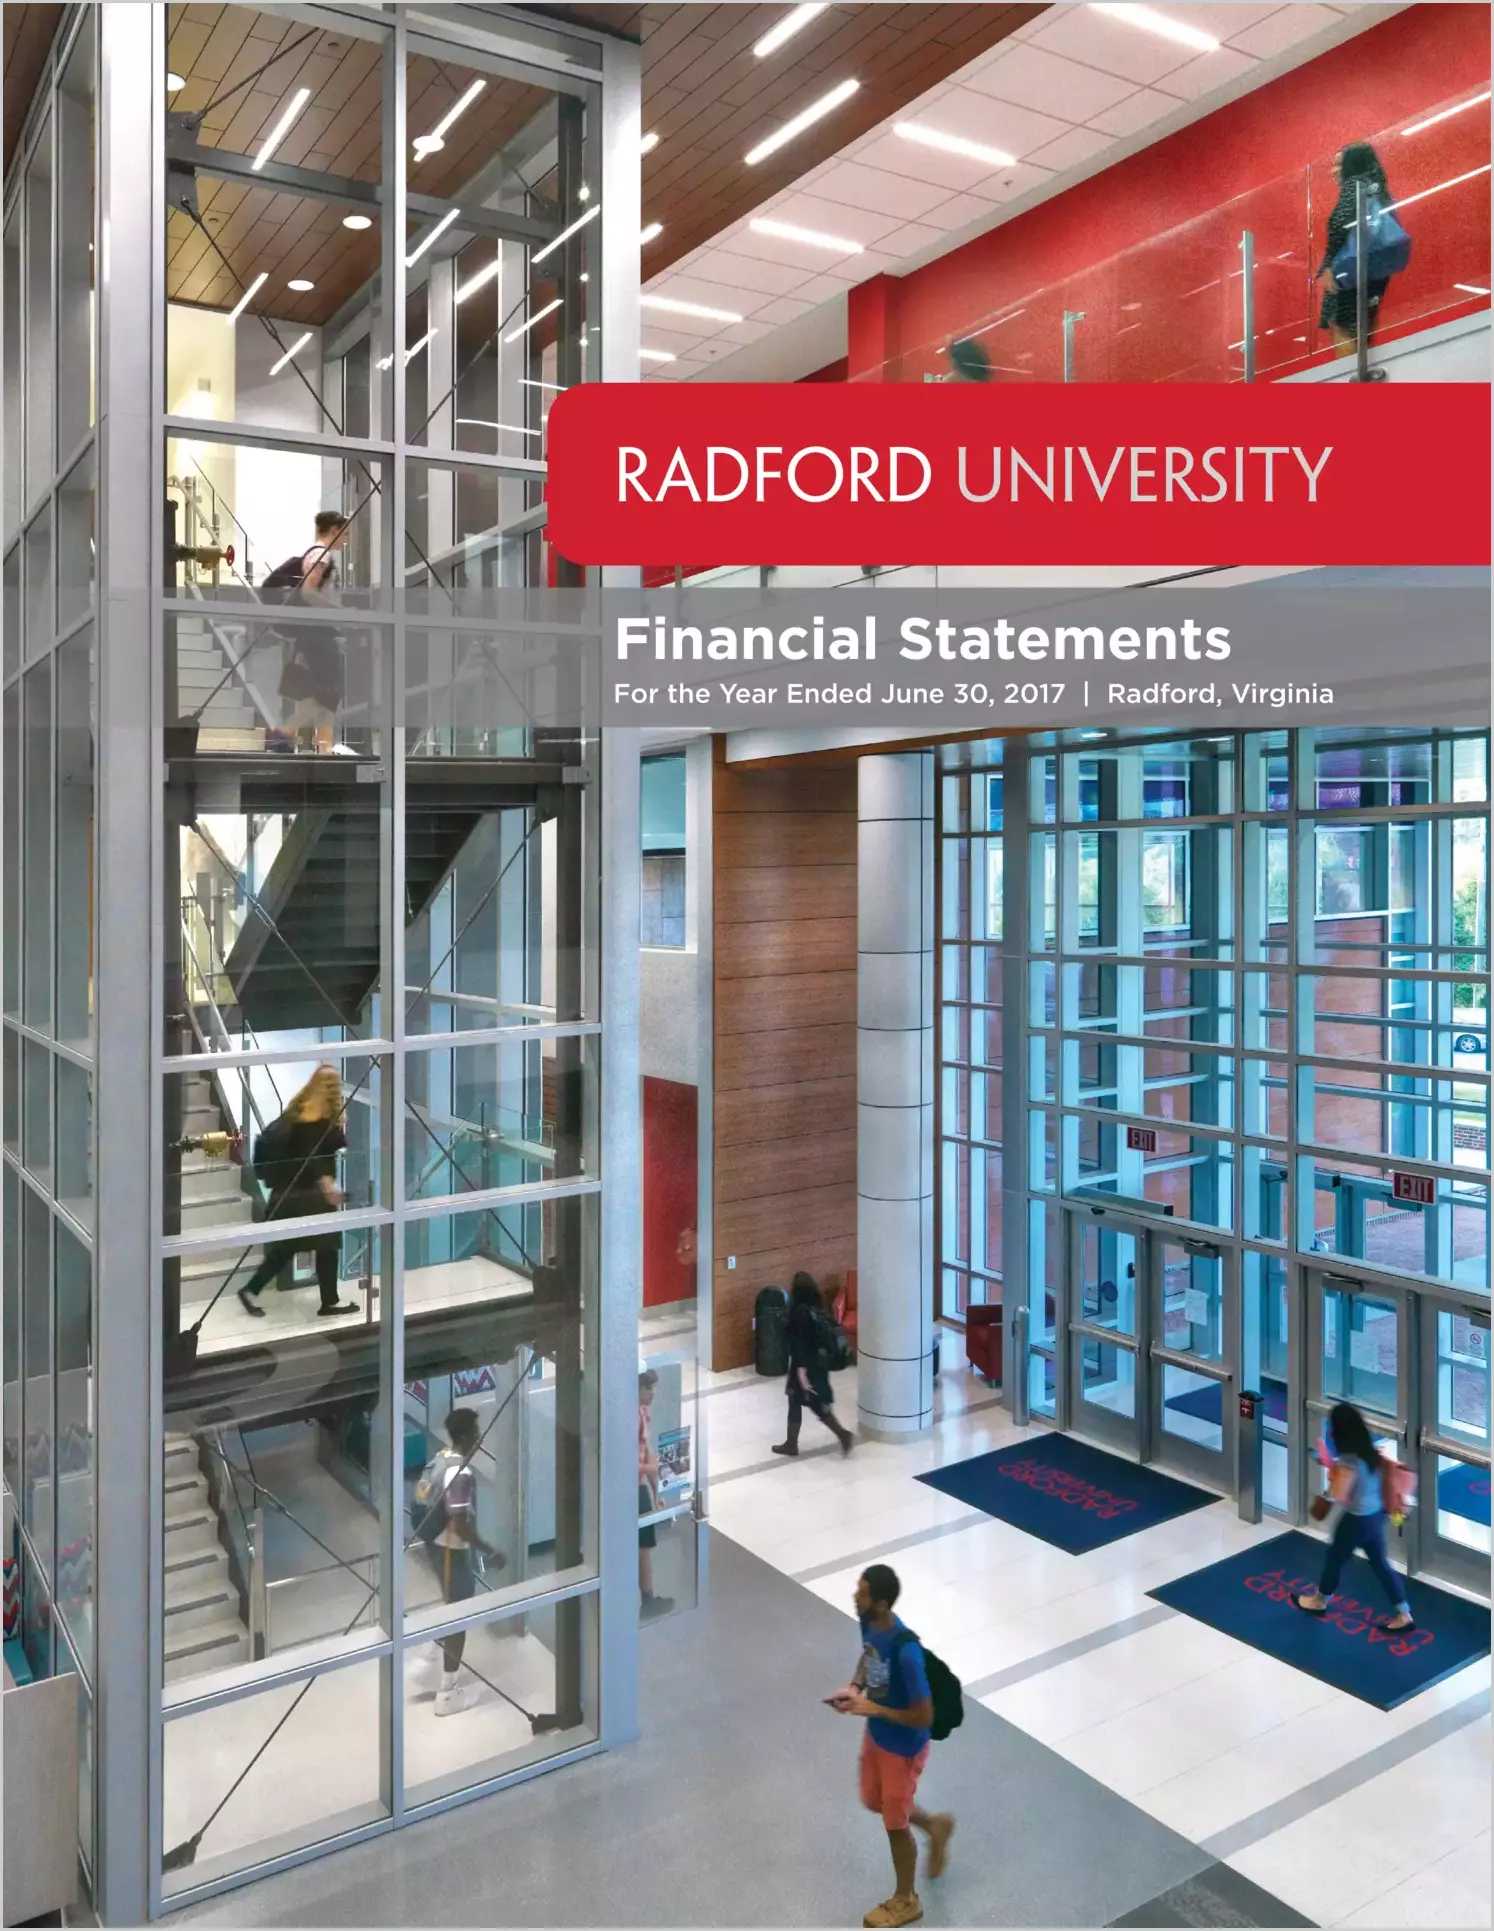 Radford University Financial Statements for the year ended June 30, 2017